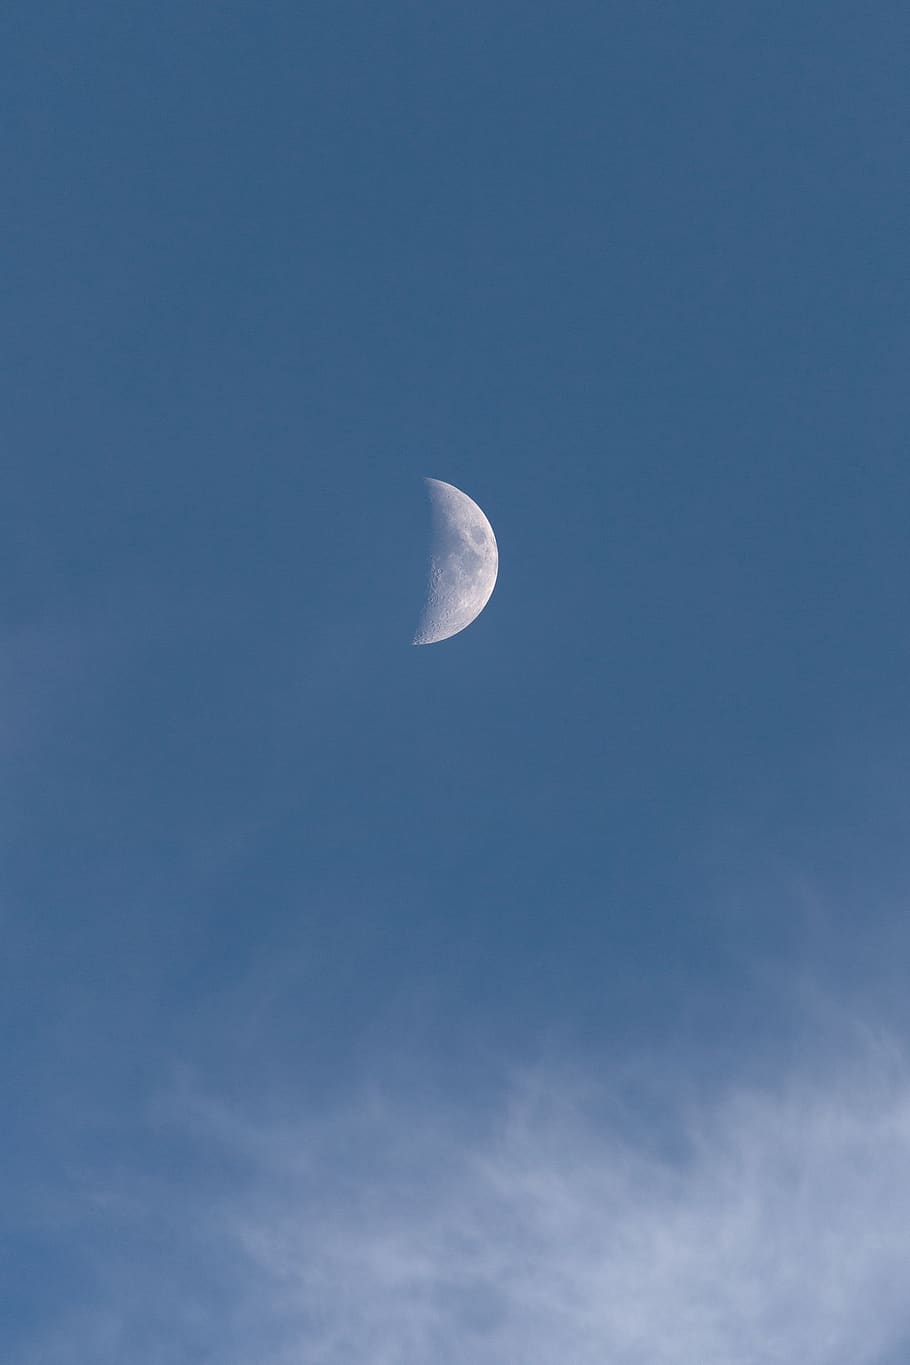 moon, blue, sky, clouds, daytime, nature, outdoors, space, lunar, atmosphere